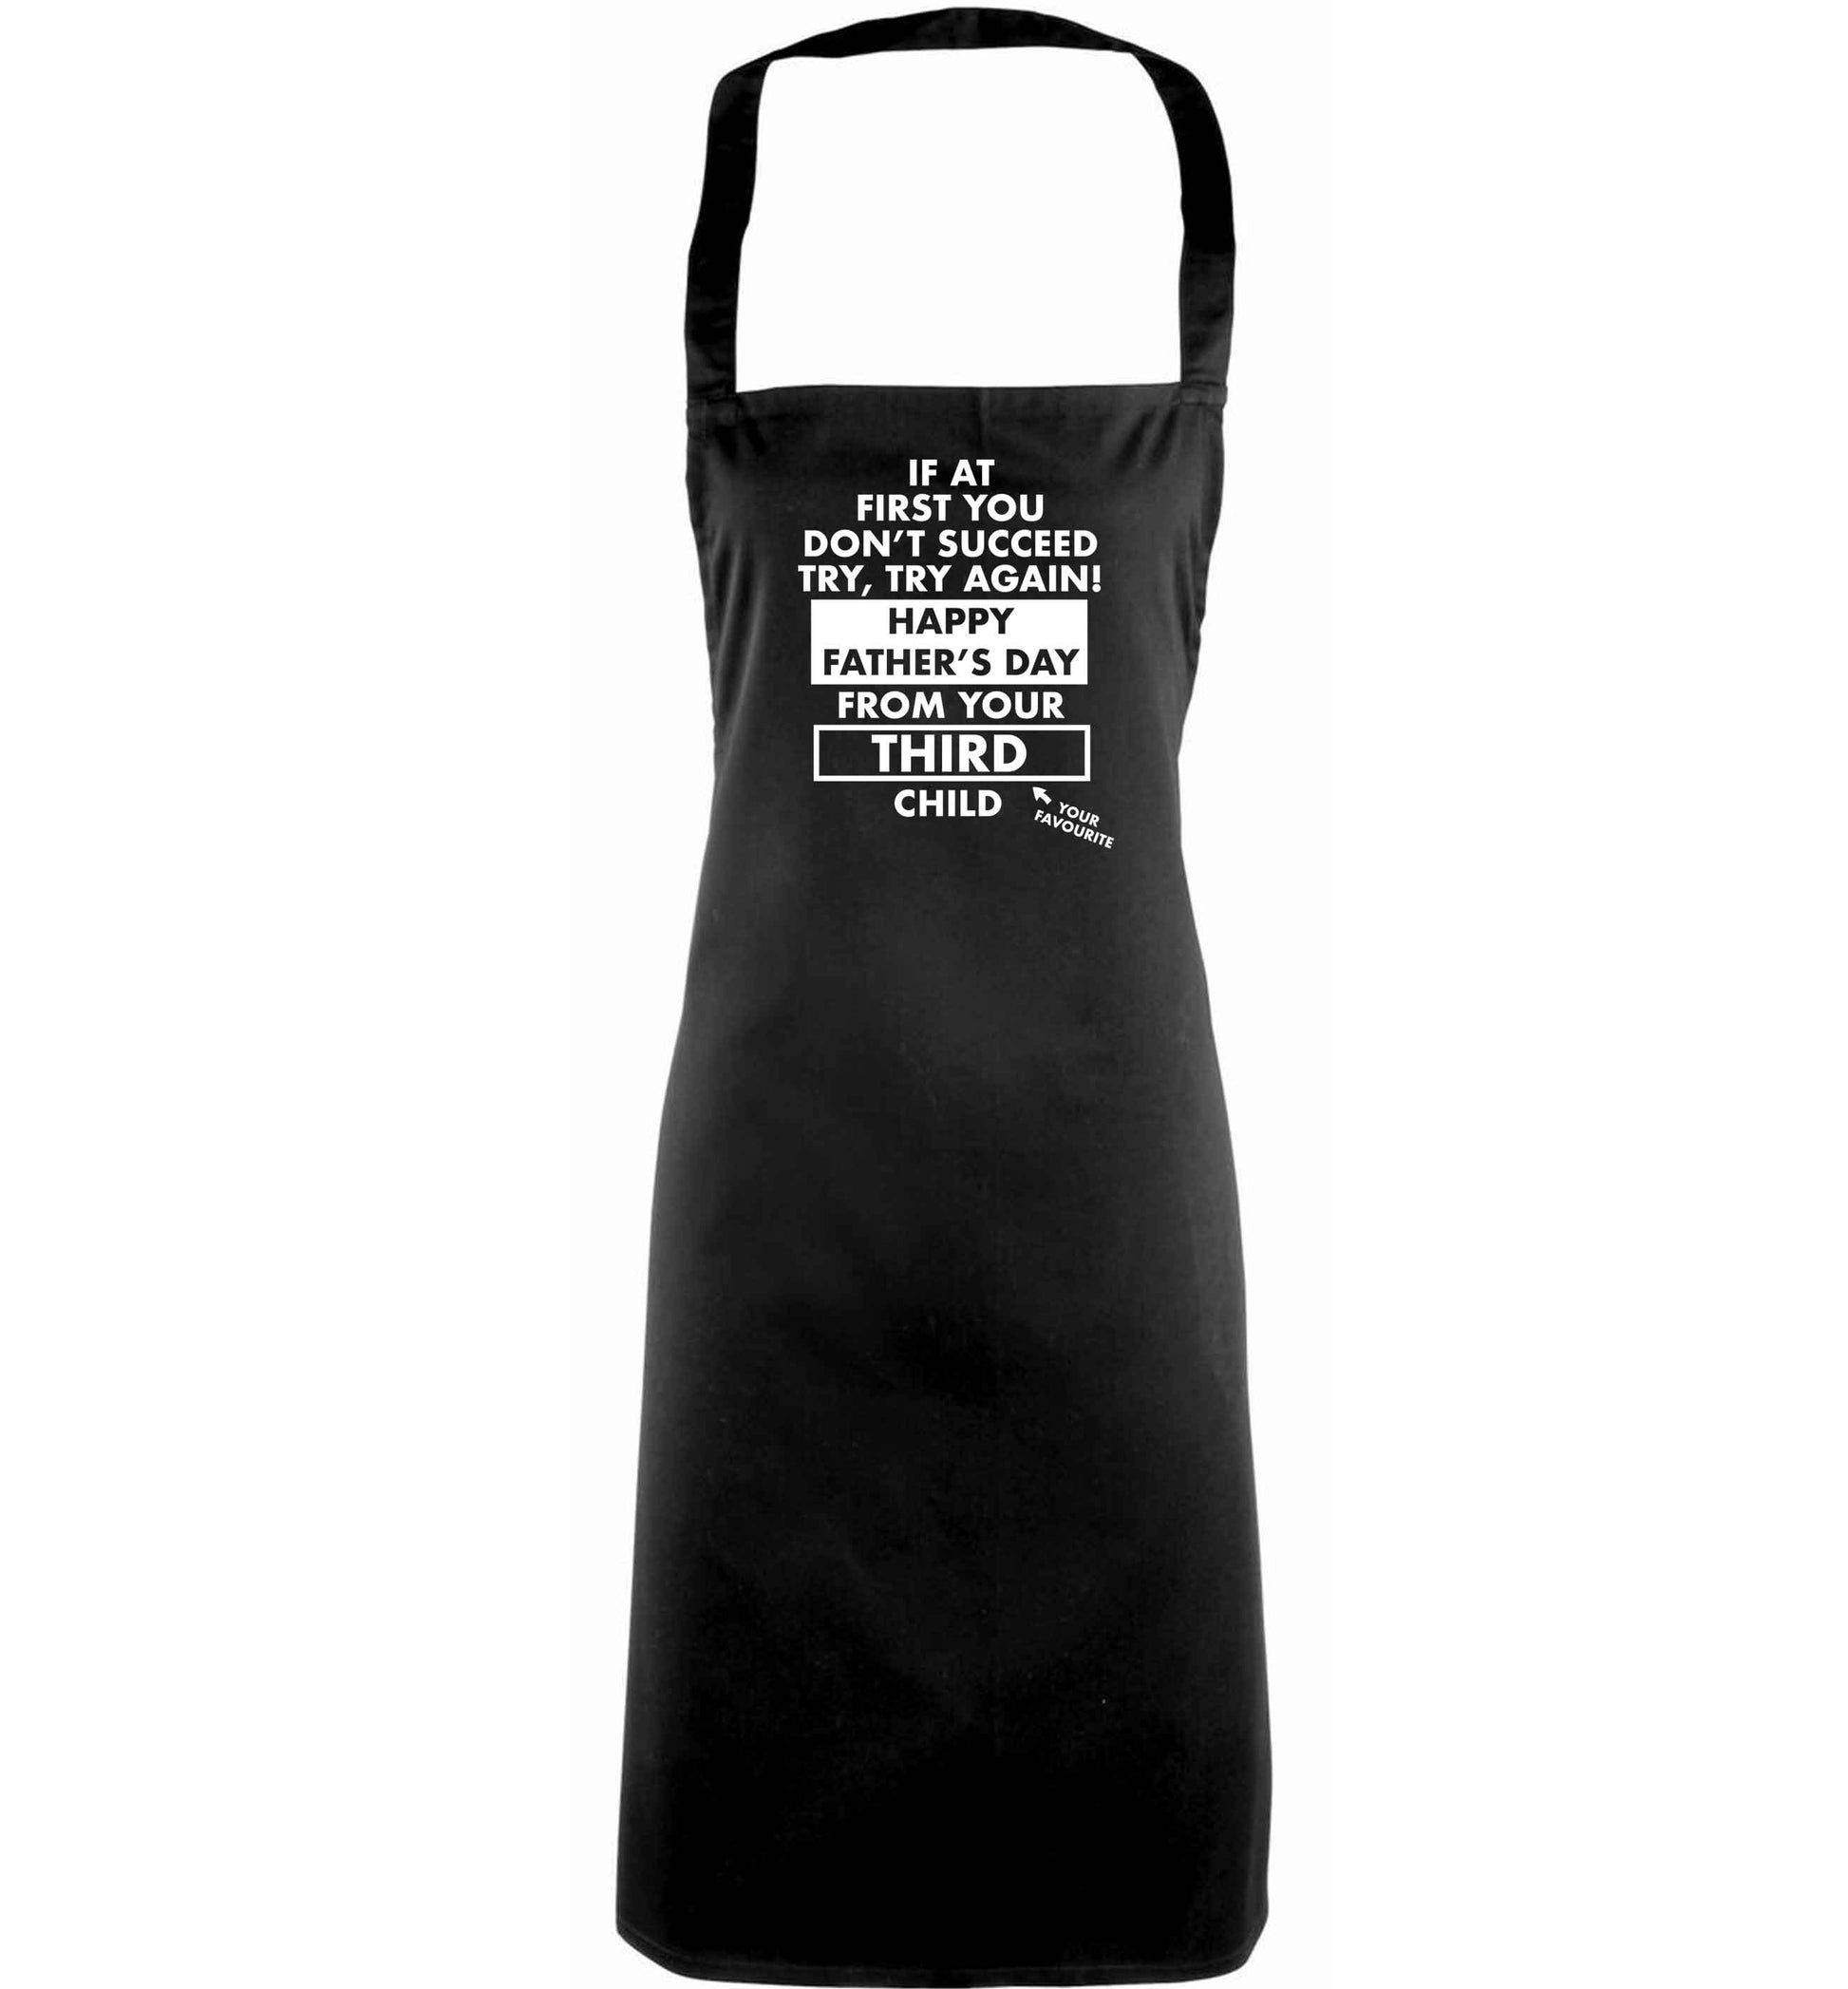 If at first you don't succeed try, try again Happy Father's day from your third child! adults black apron